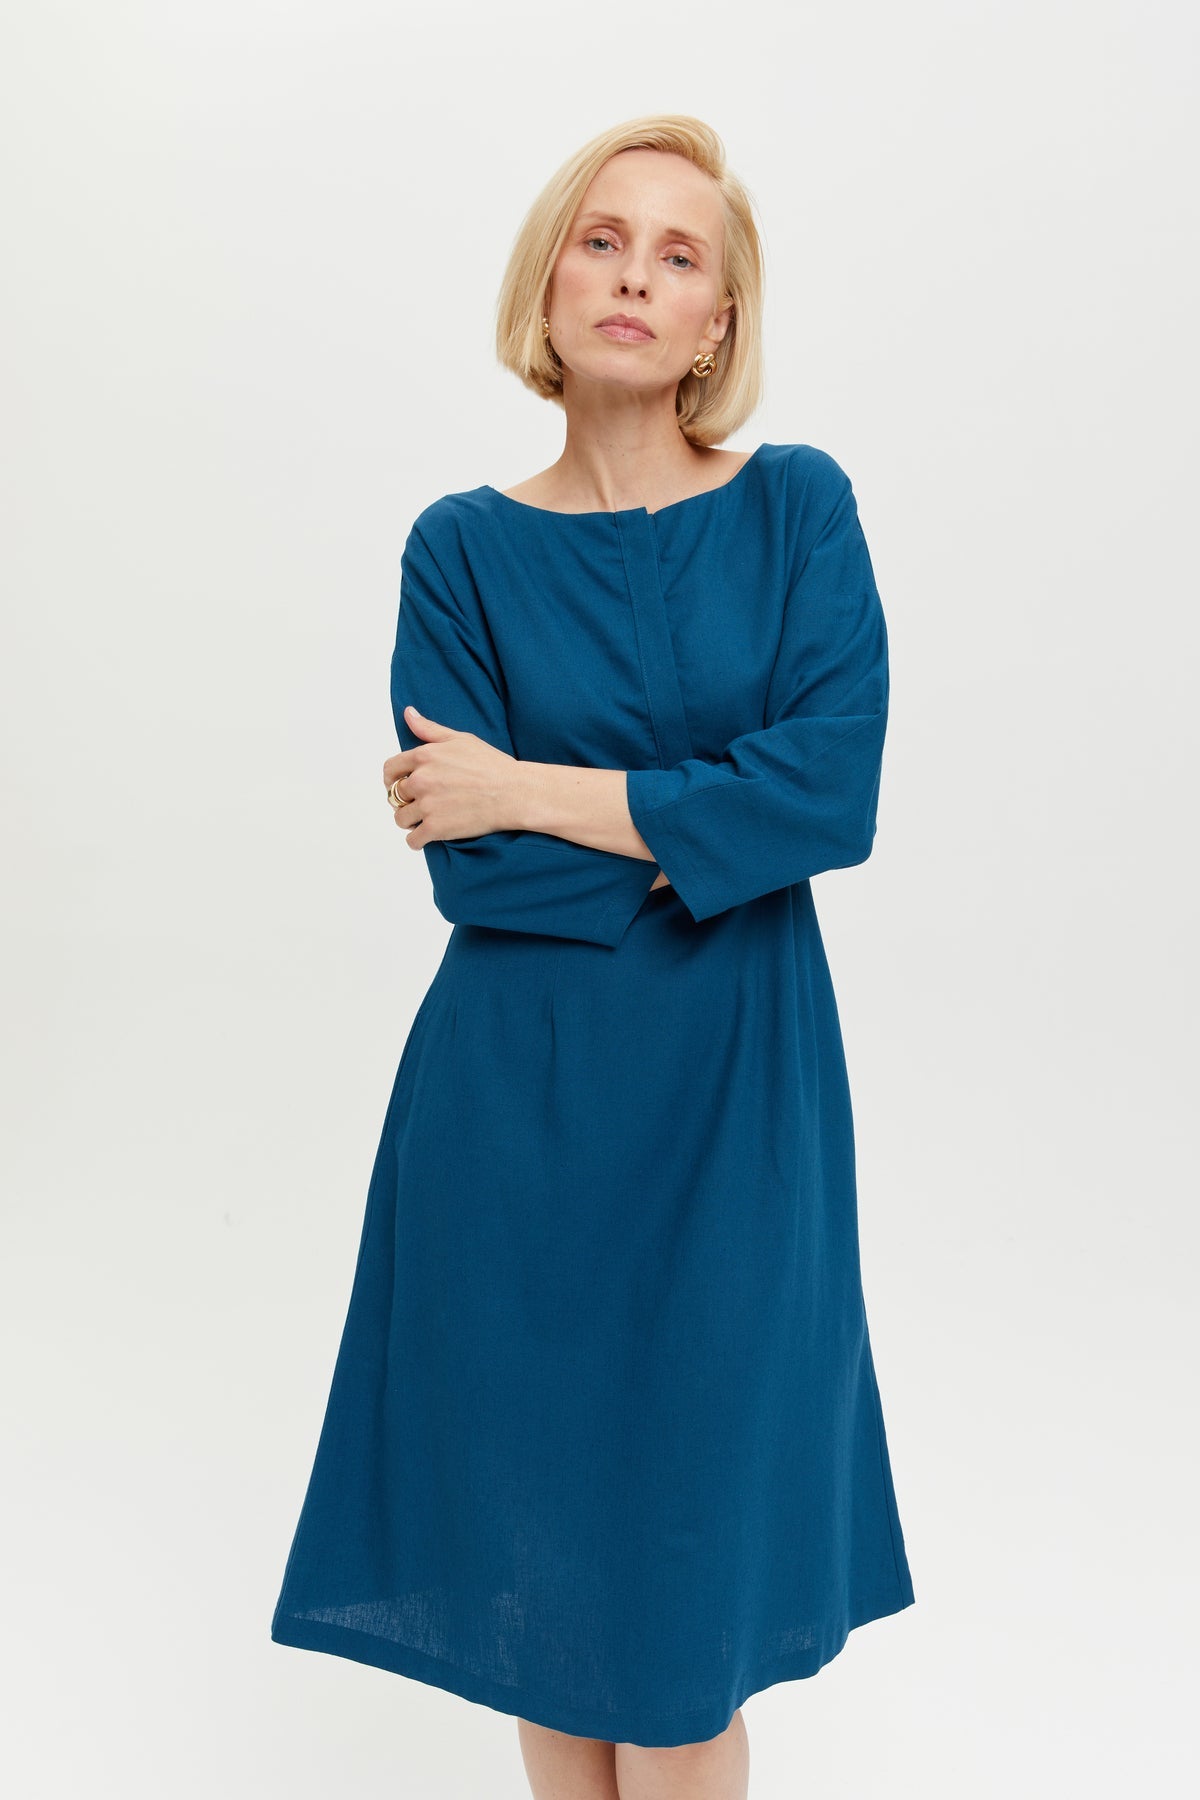 Lusin | Midi linen dress with button placket in petrol blue by Ayani